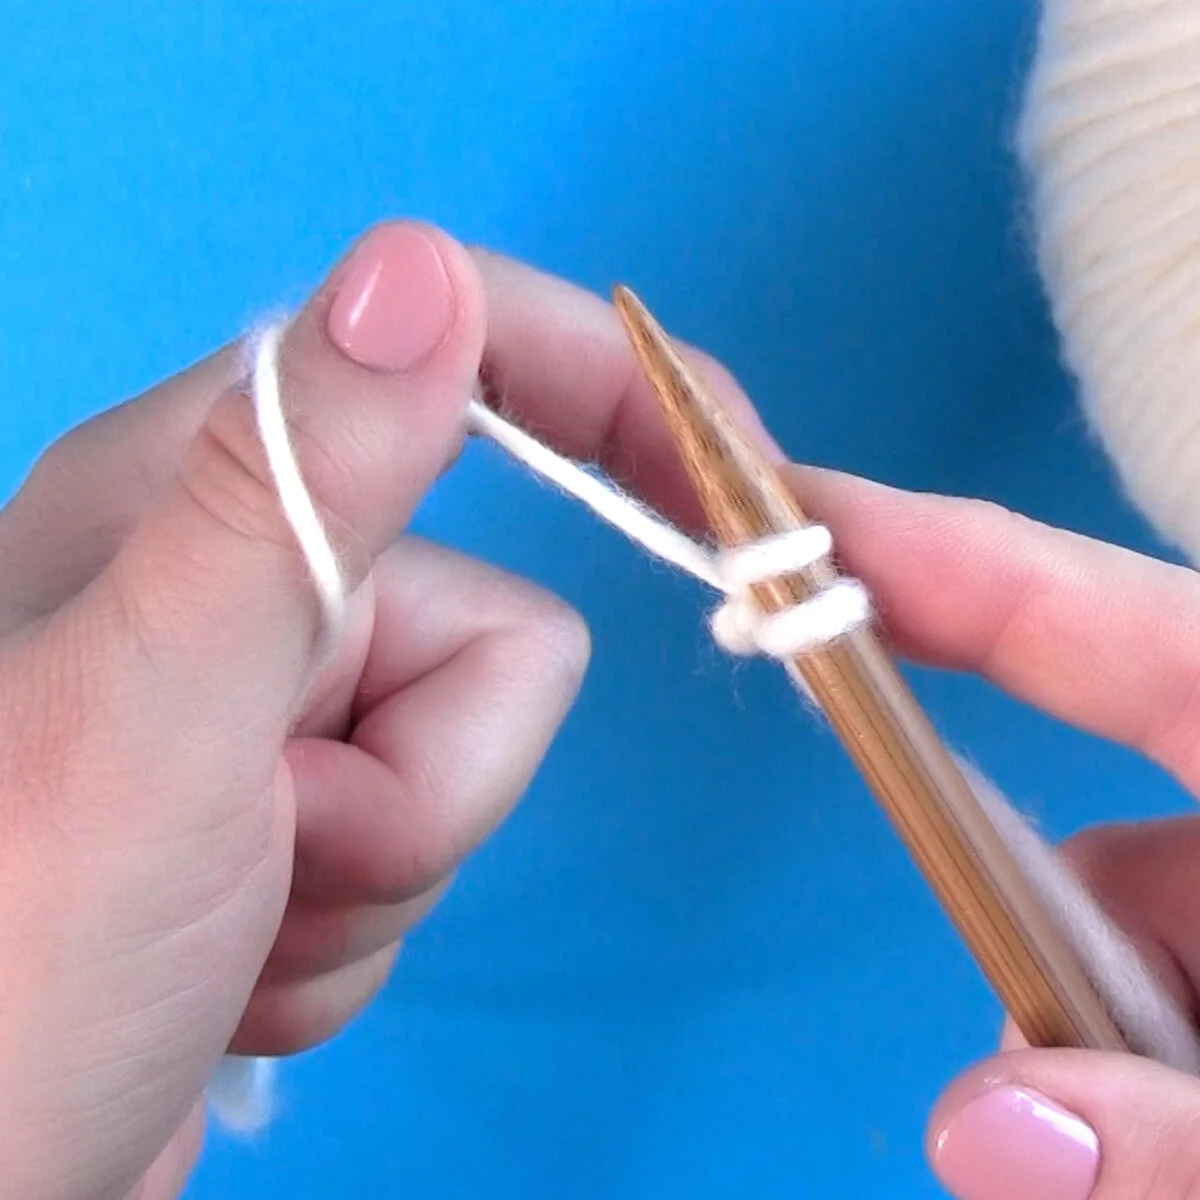 Casting on the thumb method with yarn and a knitting needle held by two hands.